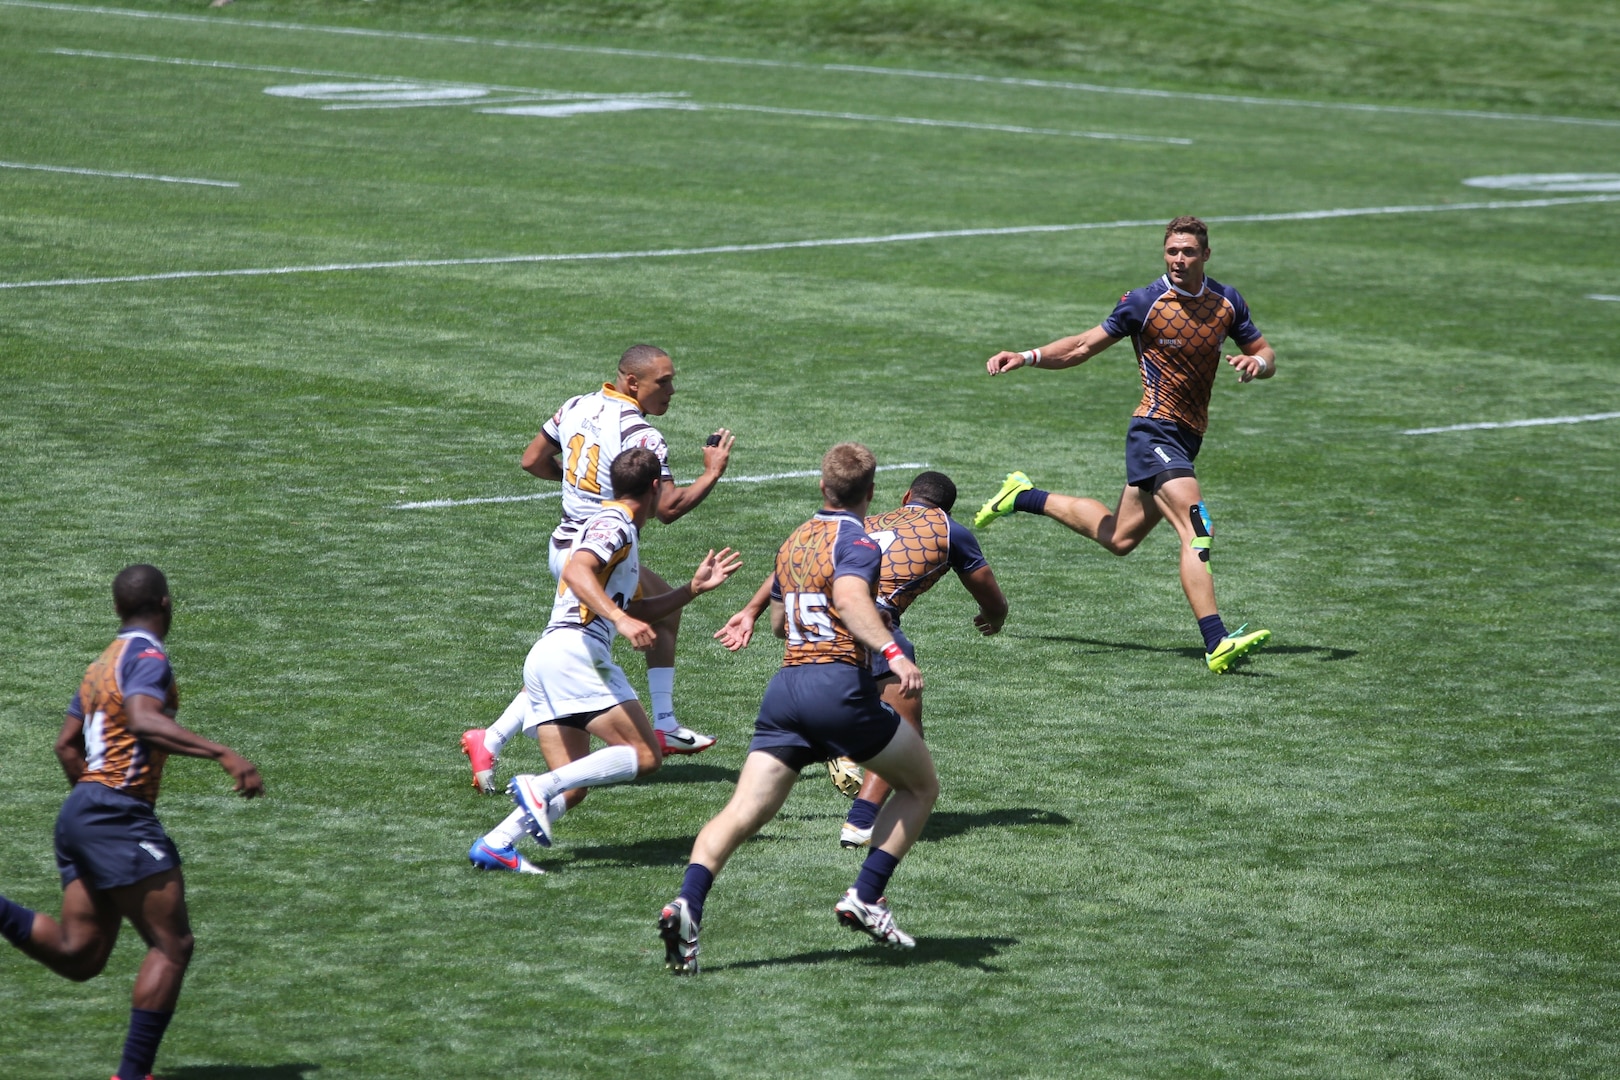 Army Spec. Stephen Johnson (#11) from Fort Bragg, NC looks for a hole to break through during Army's 28-12 victory over Navy at the 2014 Armed Forces Rugby 7’s Championship in Glendale, Colo. 15-17 August.